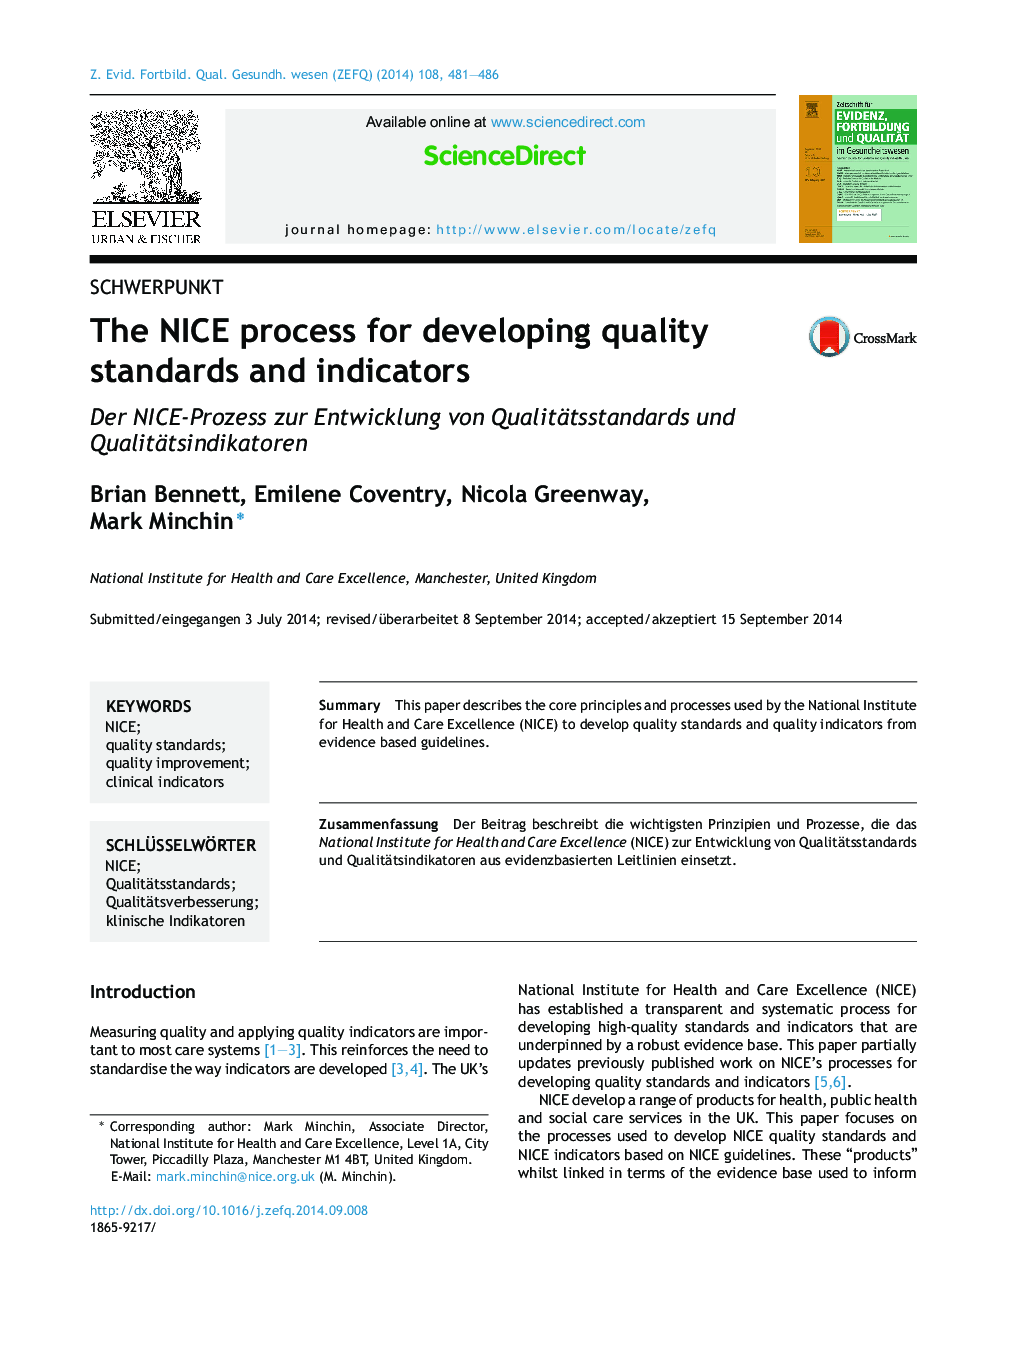 The NICE process for developing quality standards and indicators